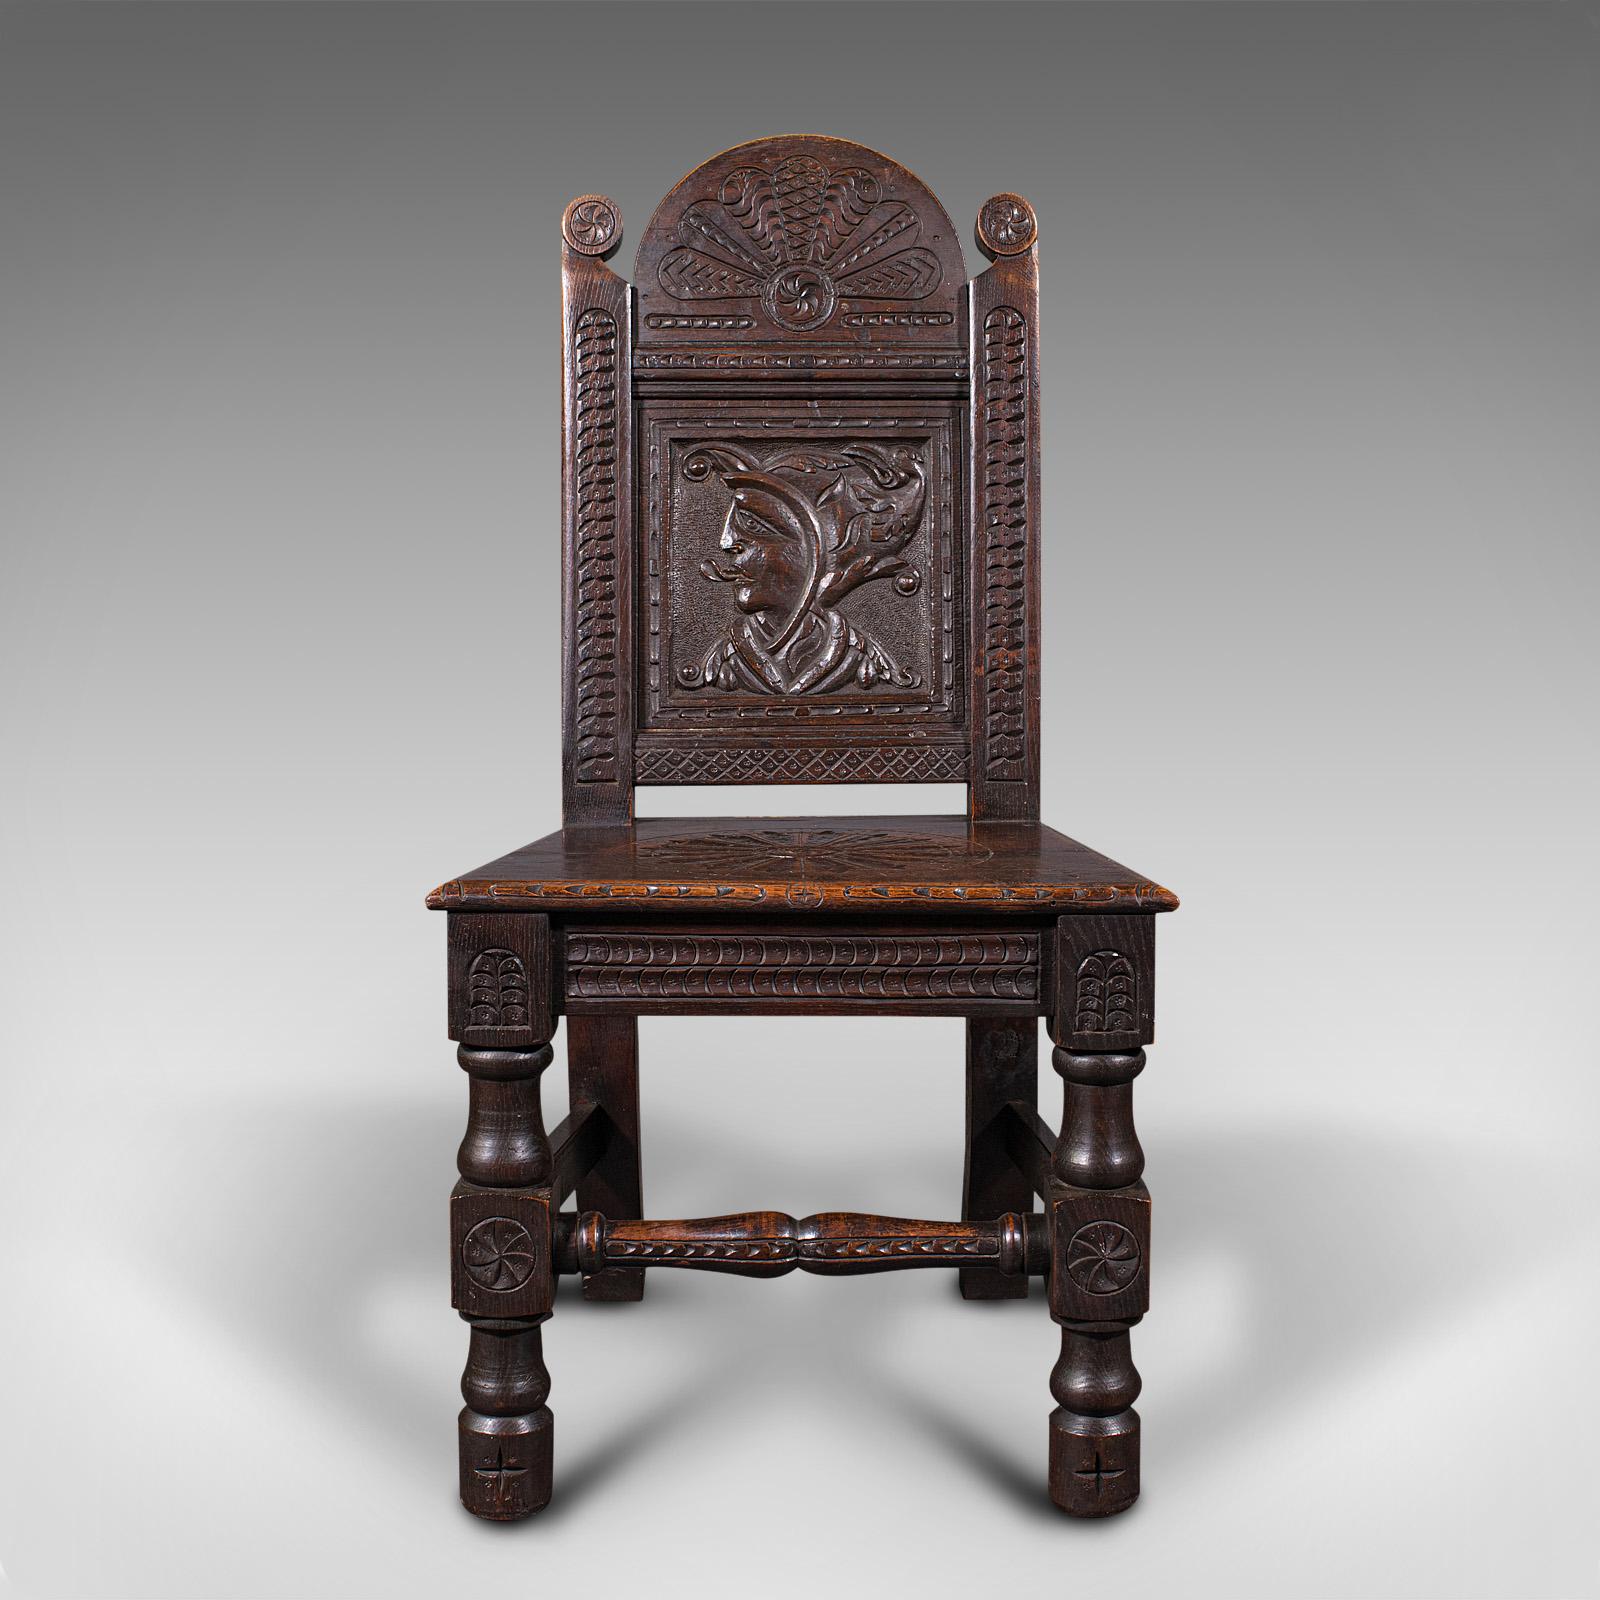 This is a pair of antique Venetian court chairs. An Italian, hand-carved oak decorative seat, dating to the Victorian period, circa 1890.

Fascinating chairs, with eye-catching detail throughout
Displays a desirable aged patina and in good